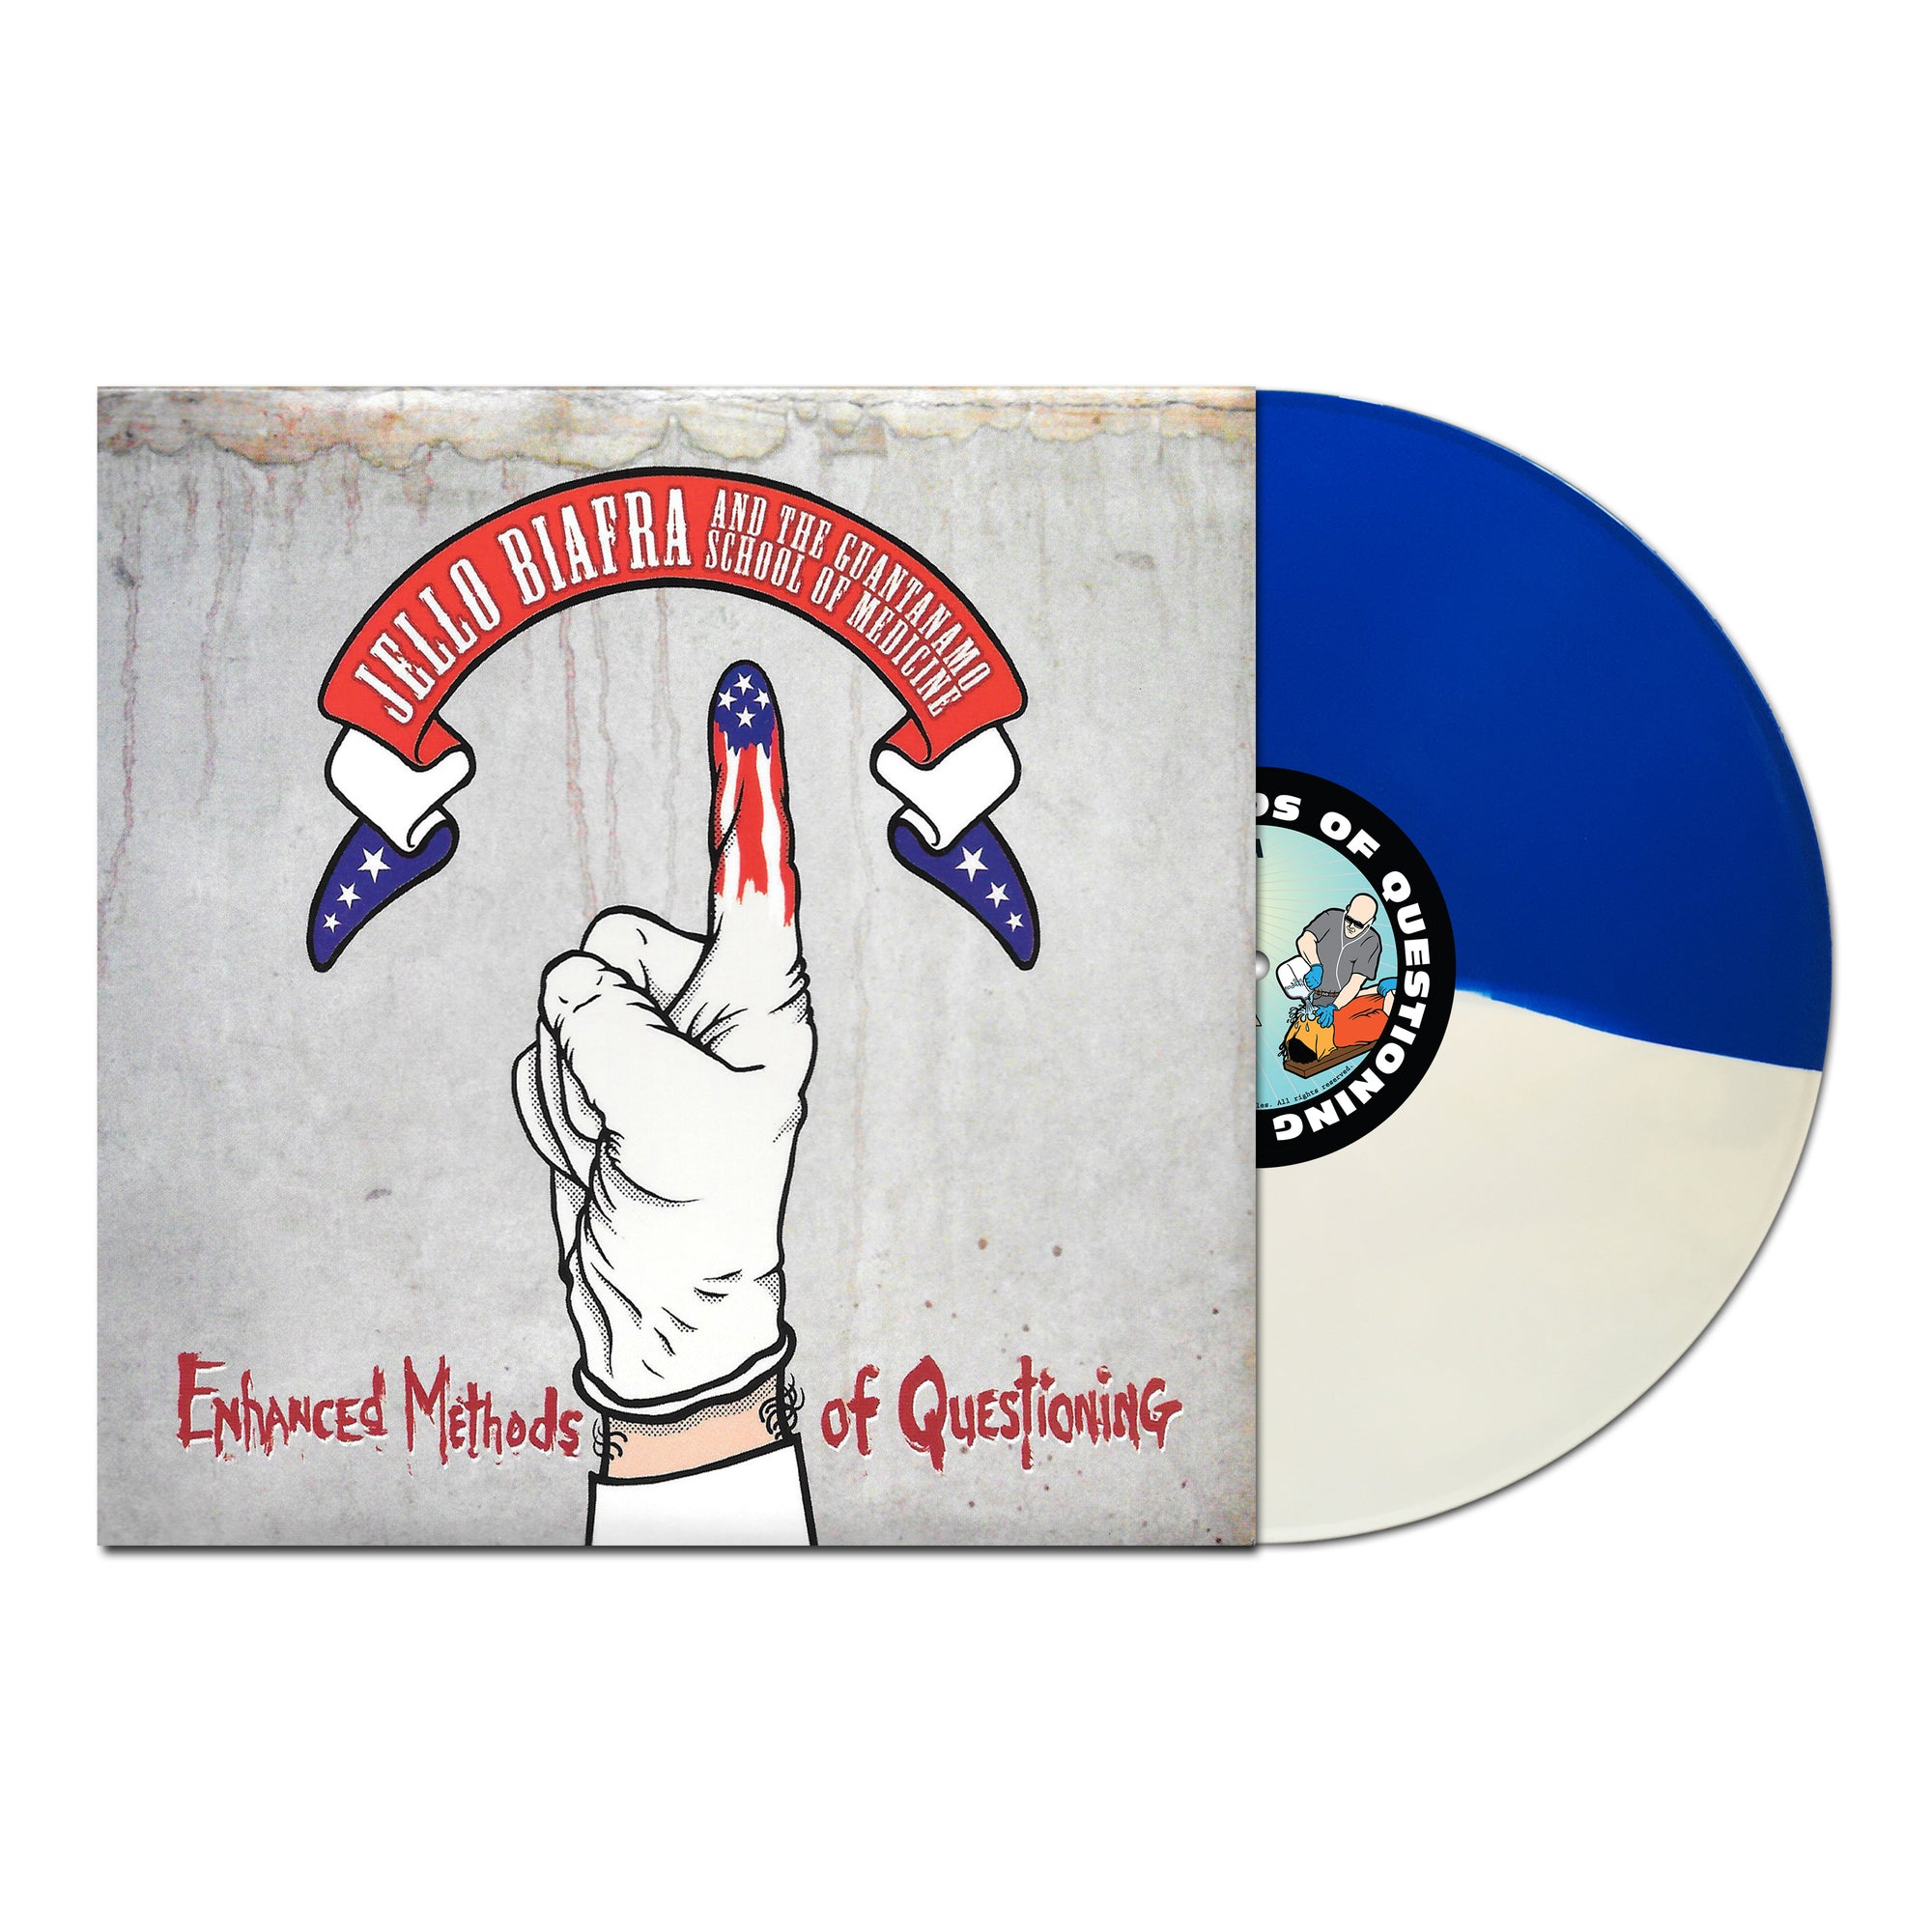 v430 - Jello Biafra And The Guantanamo School Of Medicine - "Enhanced Methods Of Questioning" - Pre-Order